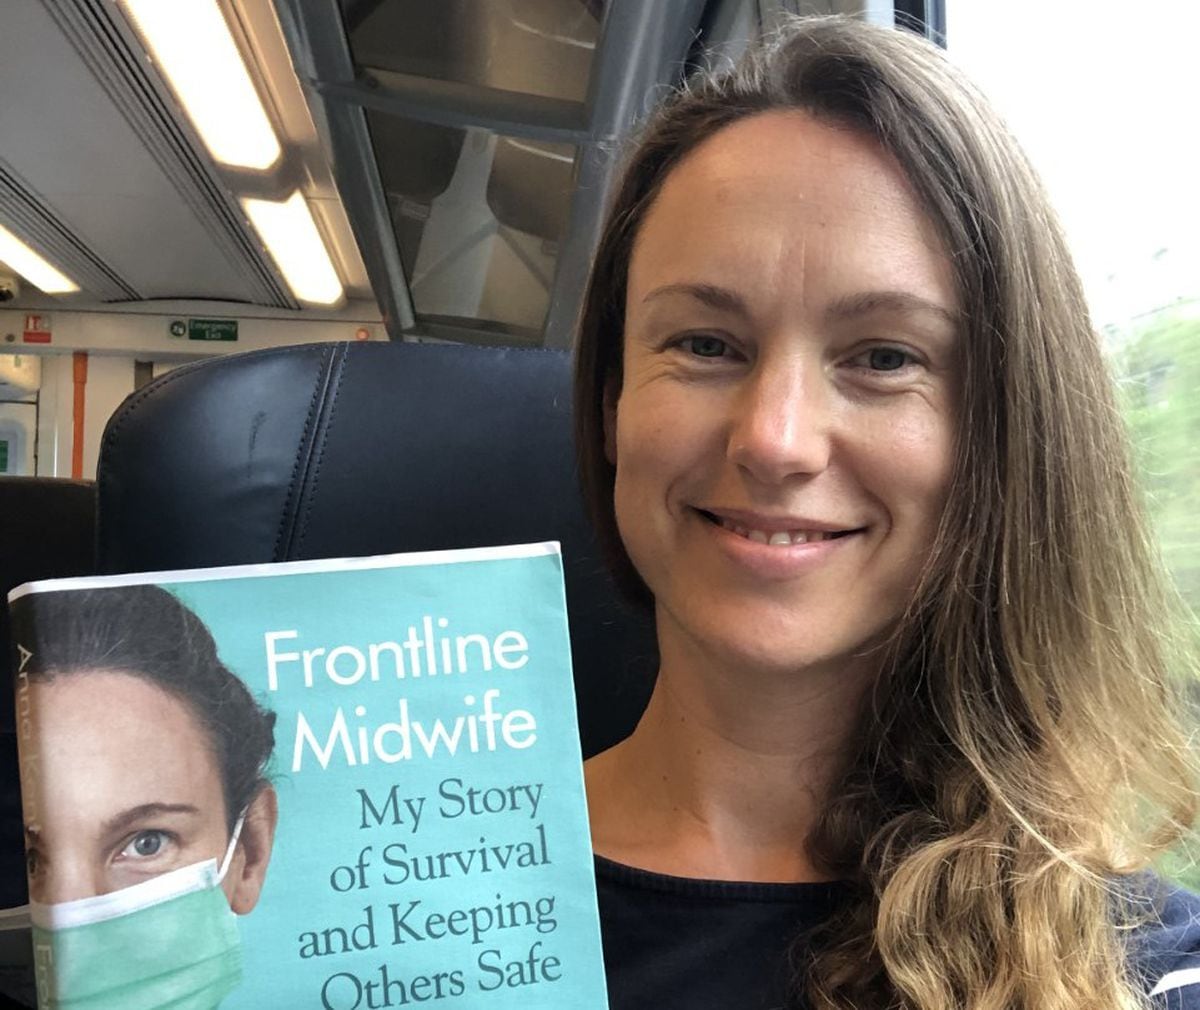 Anna with her new book Frontline Midwife